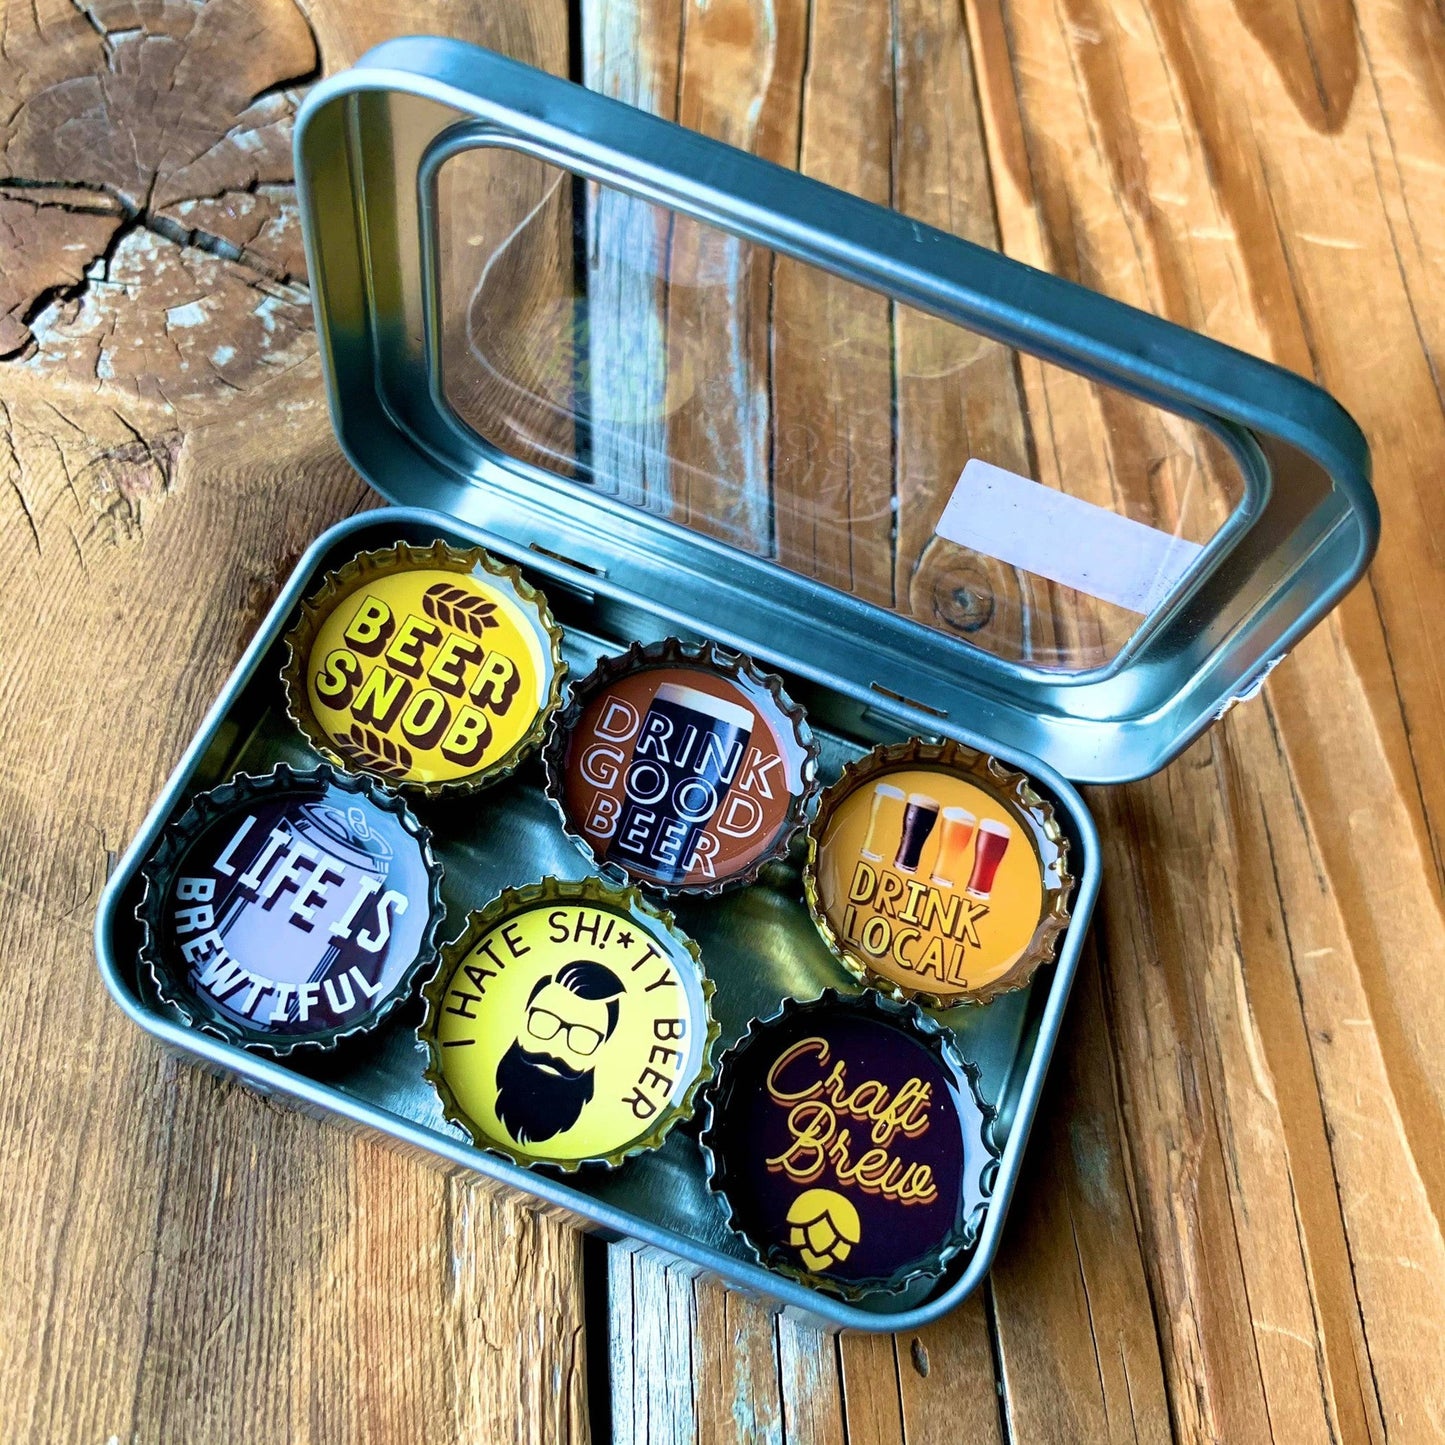 Beer Snob Magnets 6 Pack | Round Bottle-Cap Style Magnet Set in a Gift Tin